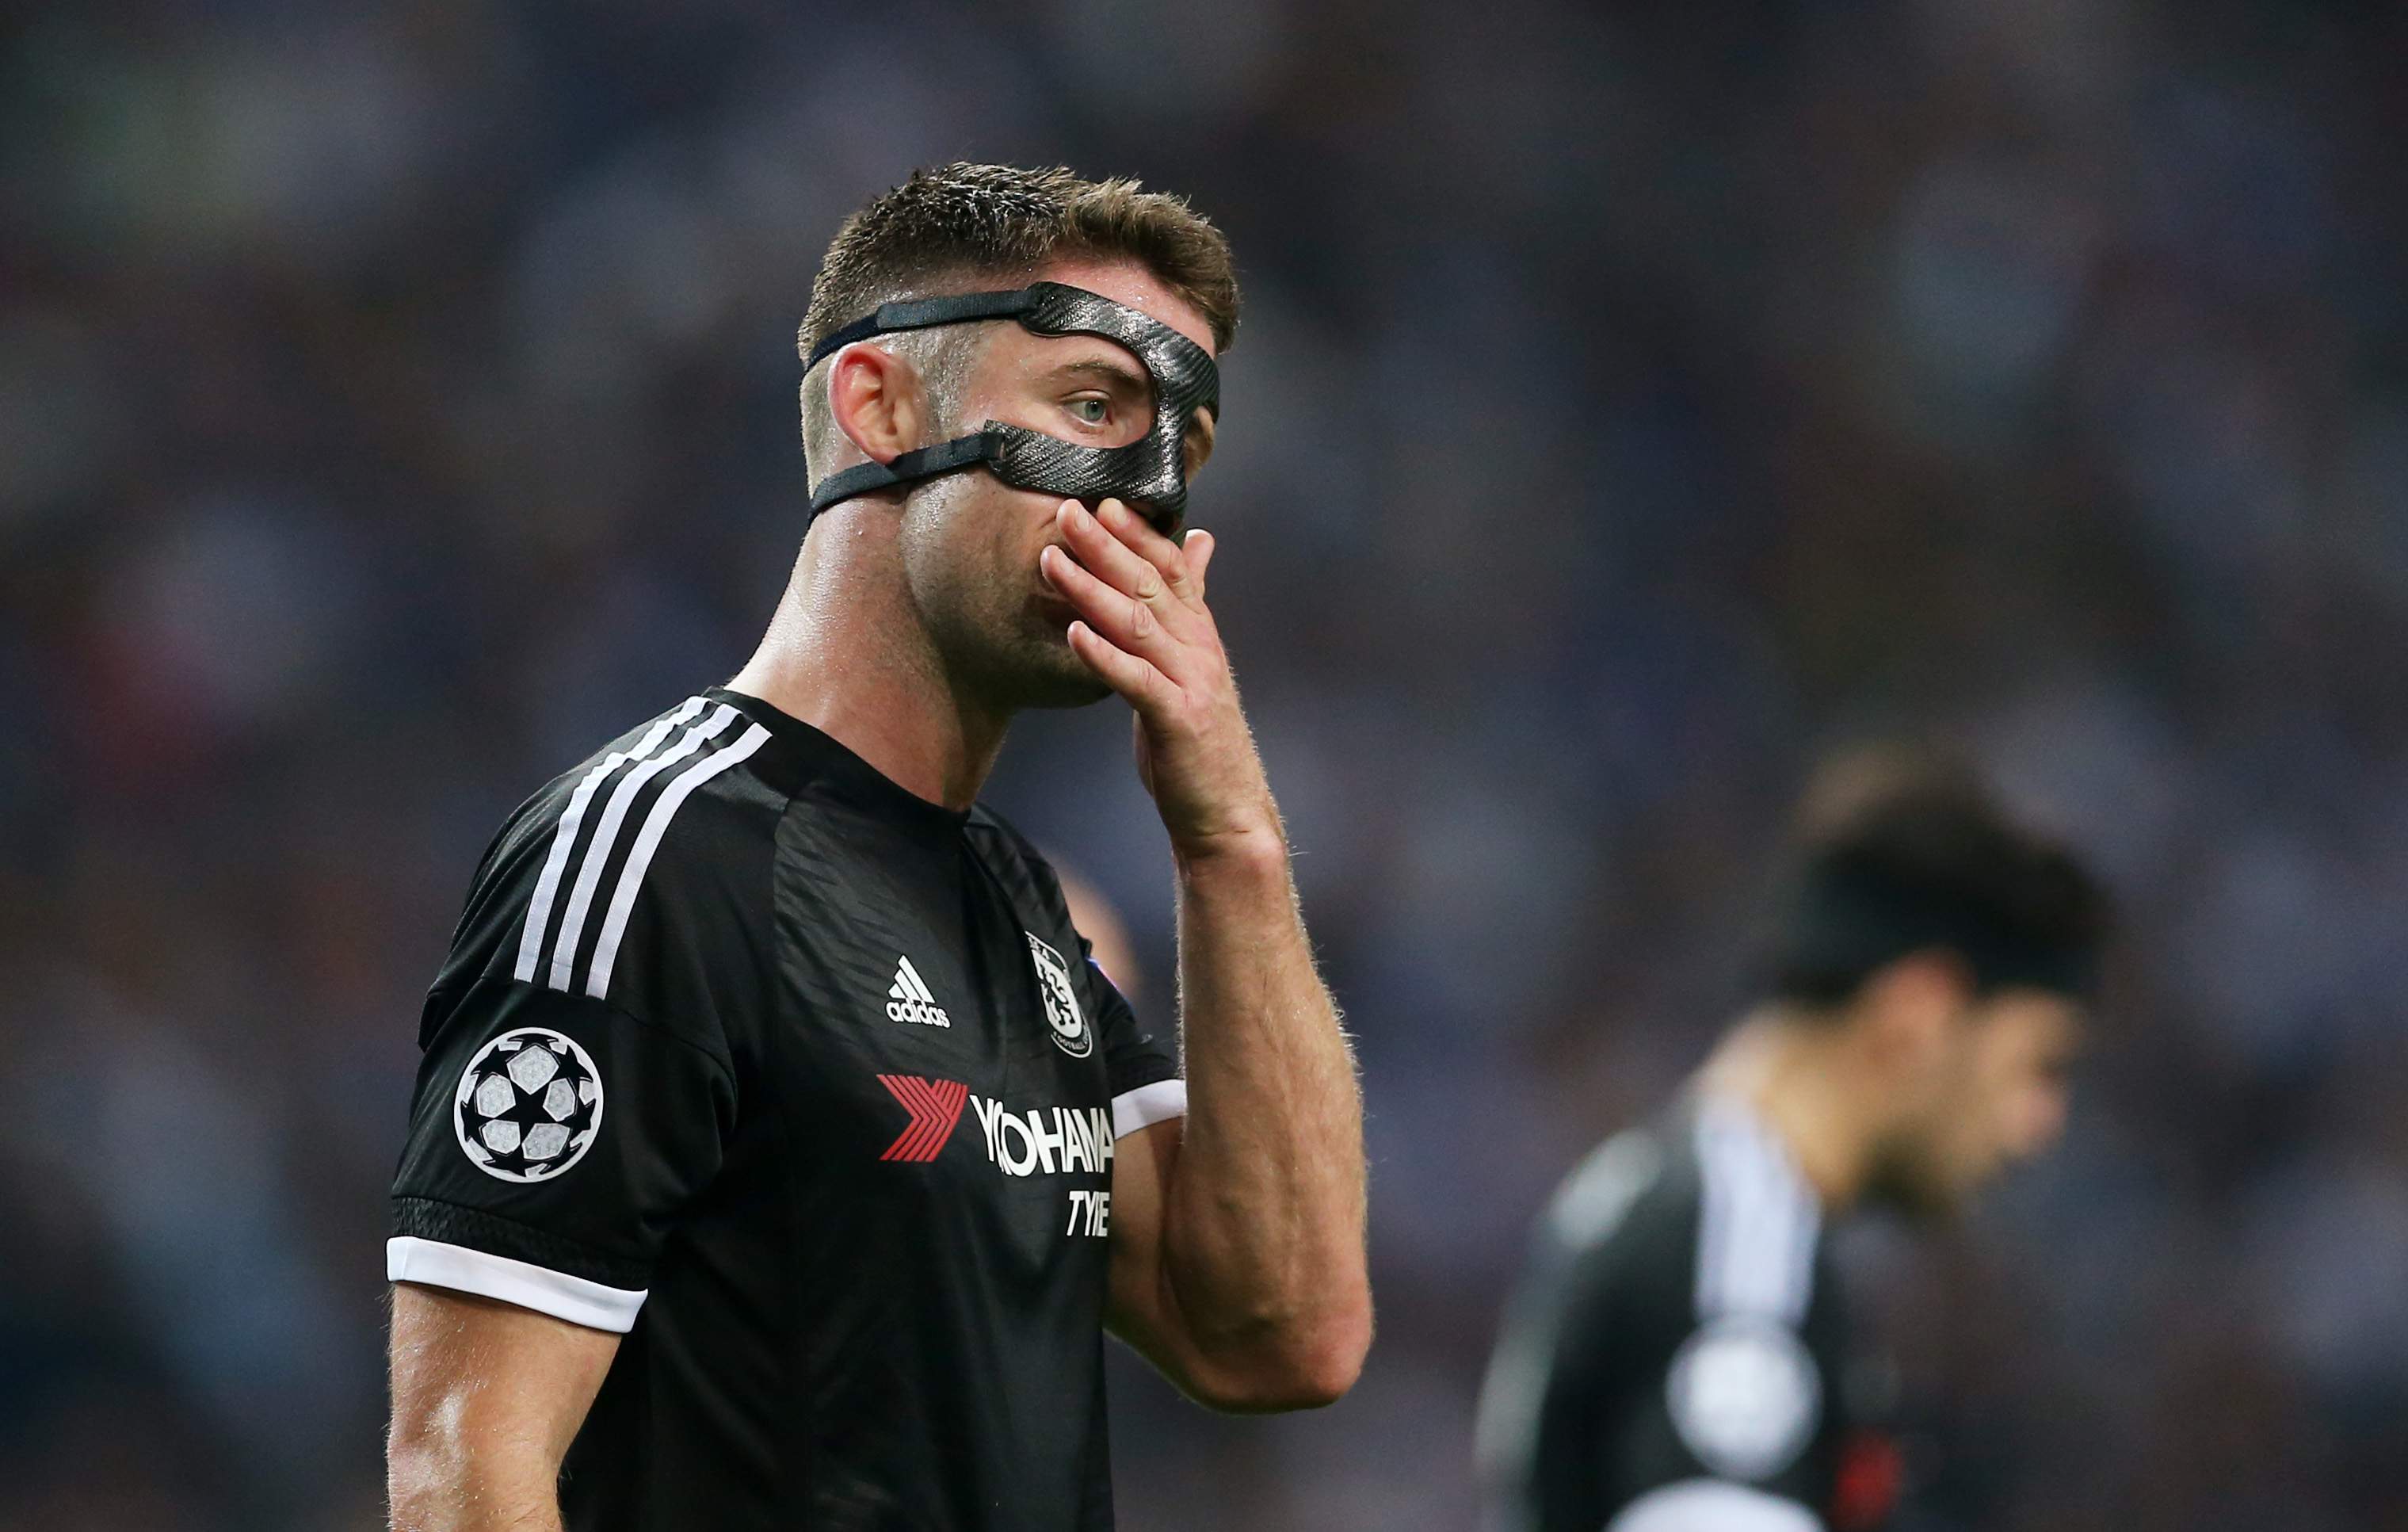 Football - FC Porto v Chelsea - UEFA Champions League Group Stage - Group G - Dragao Stadium, Oporto, Portugal - 29/9/15 Chelsea's Gary Cahill looks dejected at the end Action Images via Reuters / Matthew Childs Livepic EDITORIAL USE ONLY.